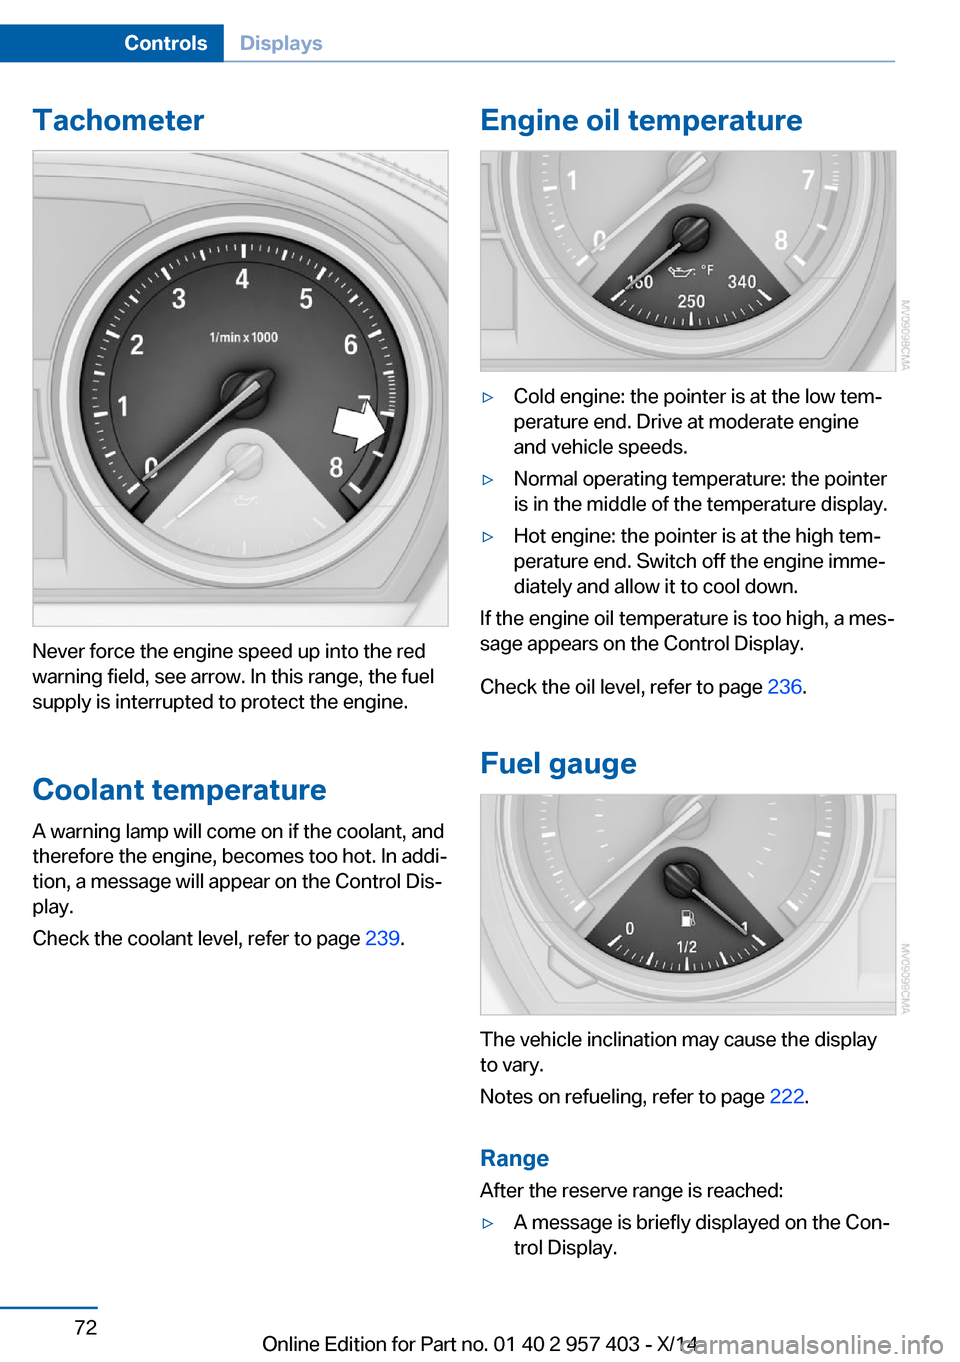 BMW Z4 2014 E89 User Guide Tachometer
Never force the engine speed up into the red
warning field, see arrow. In this range, the fuel
supply is interrupted to protect the engine.
Coolant temperature A warning lamp will come on i